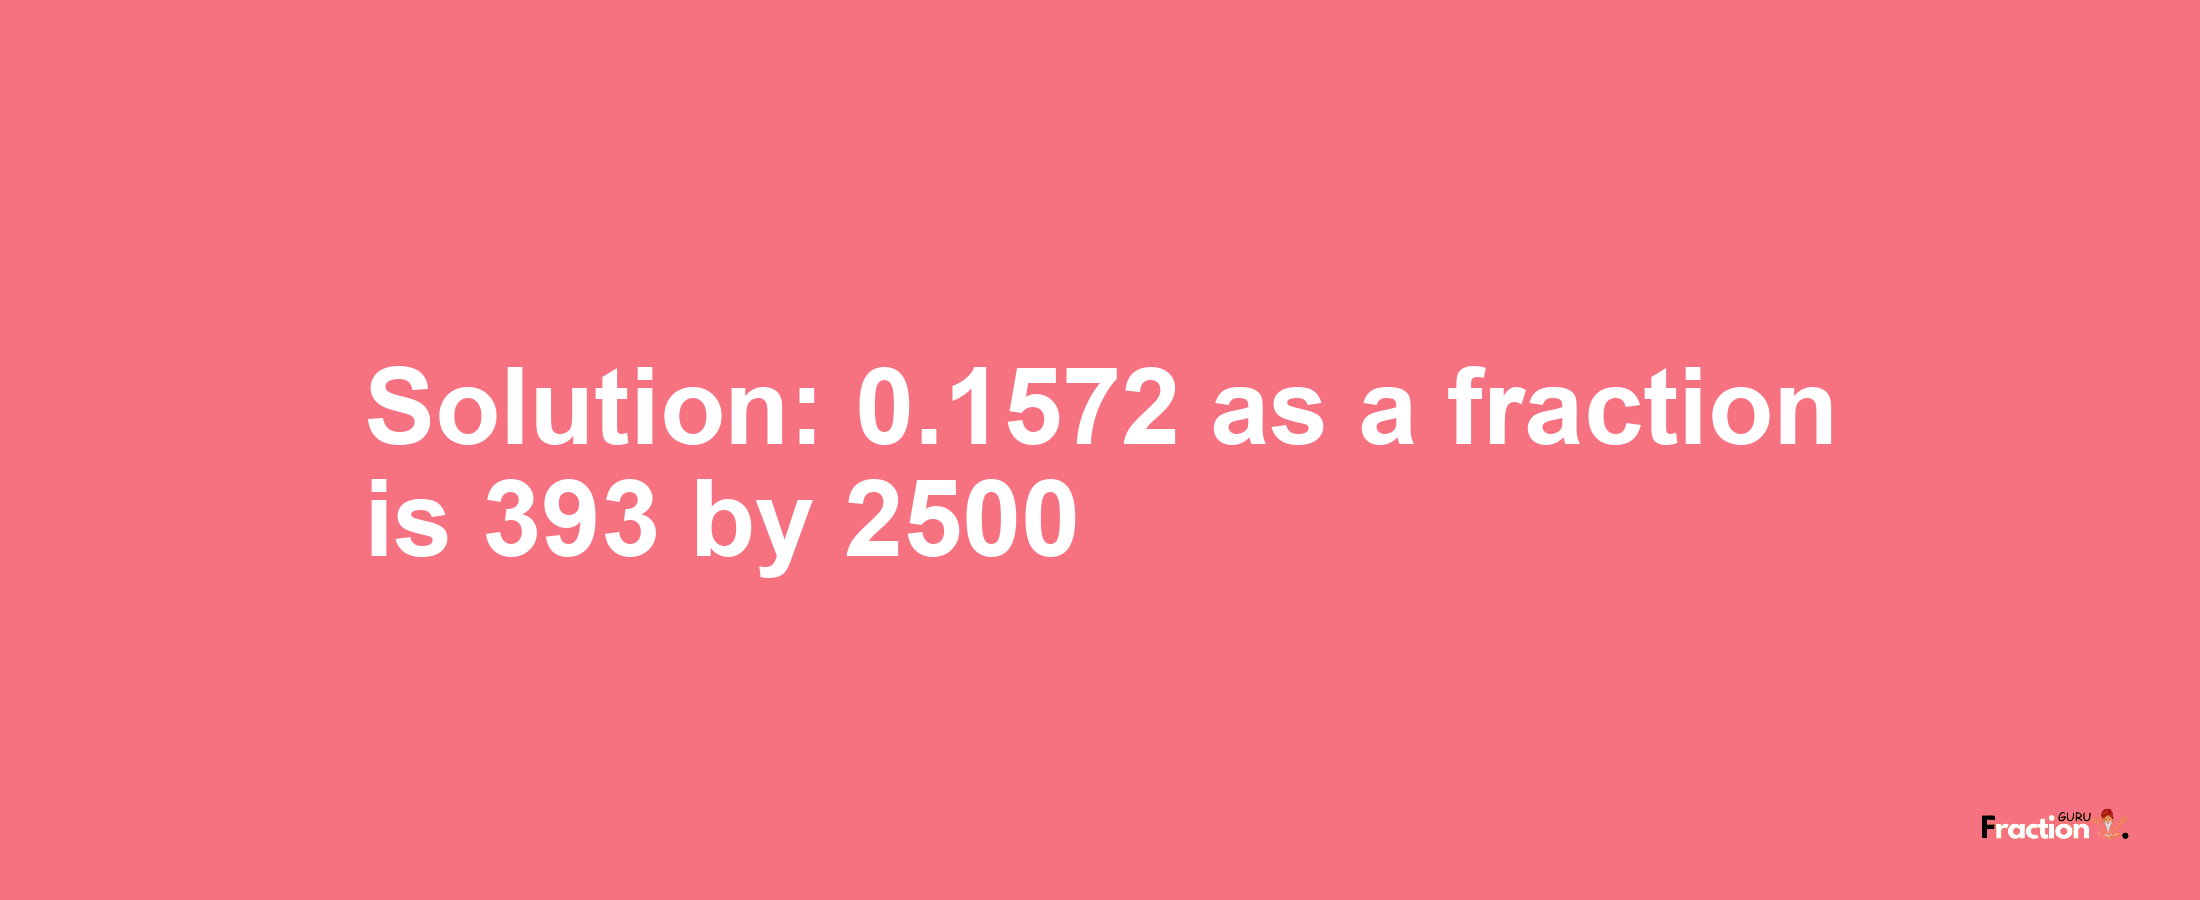 Solution:0.1572 as a fraction is 393/2500